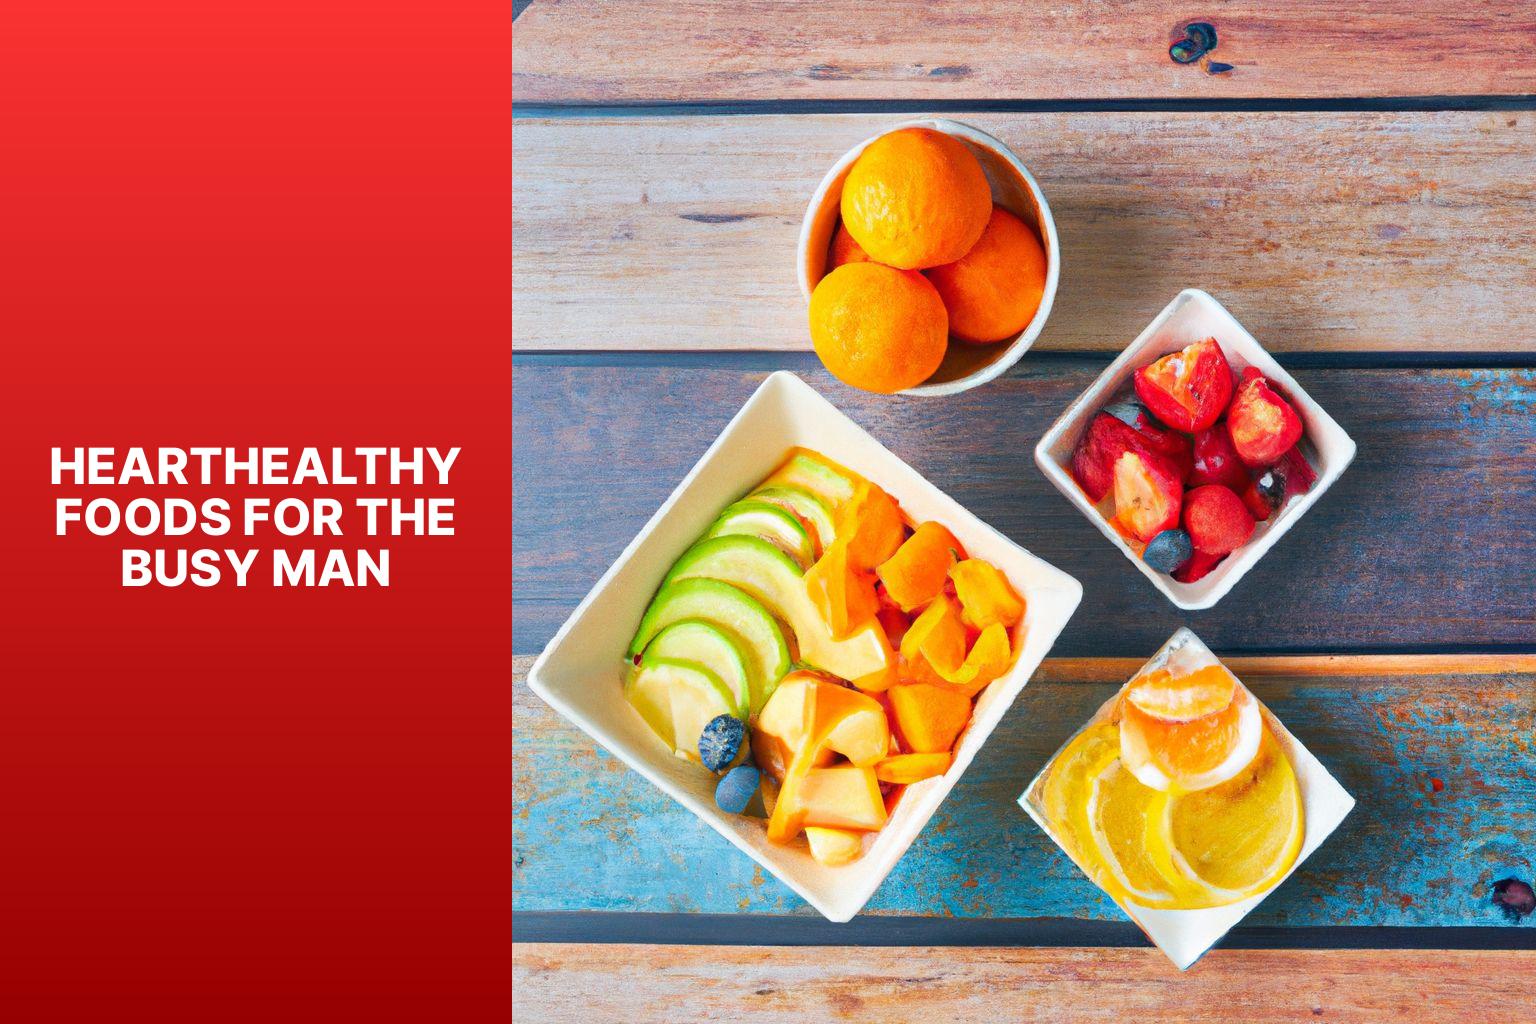 Heart-Healthy Foods for the Busy Man